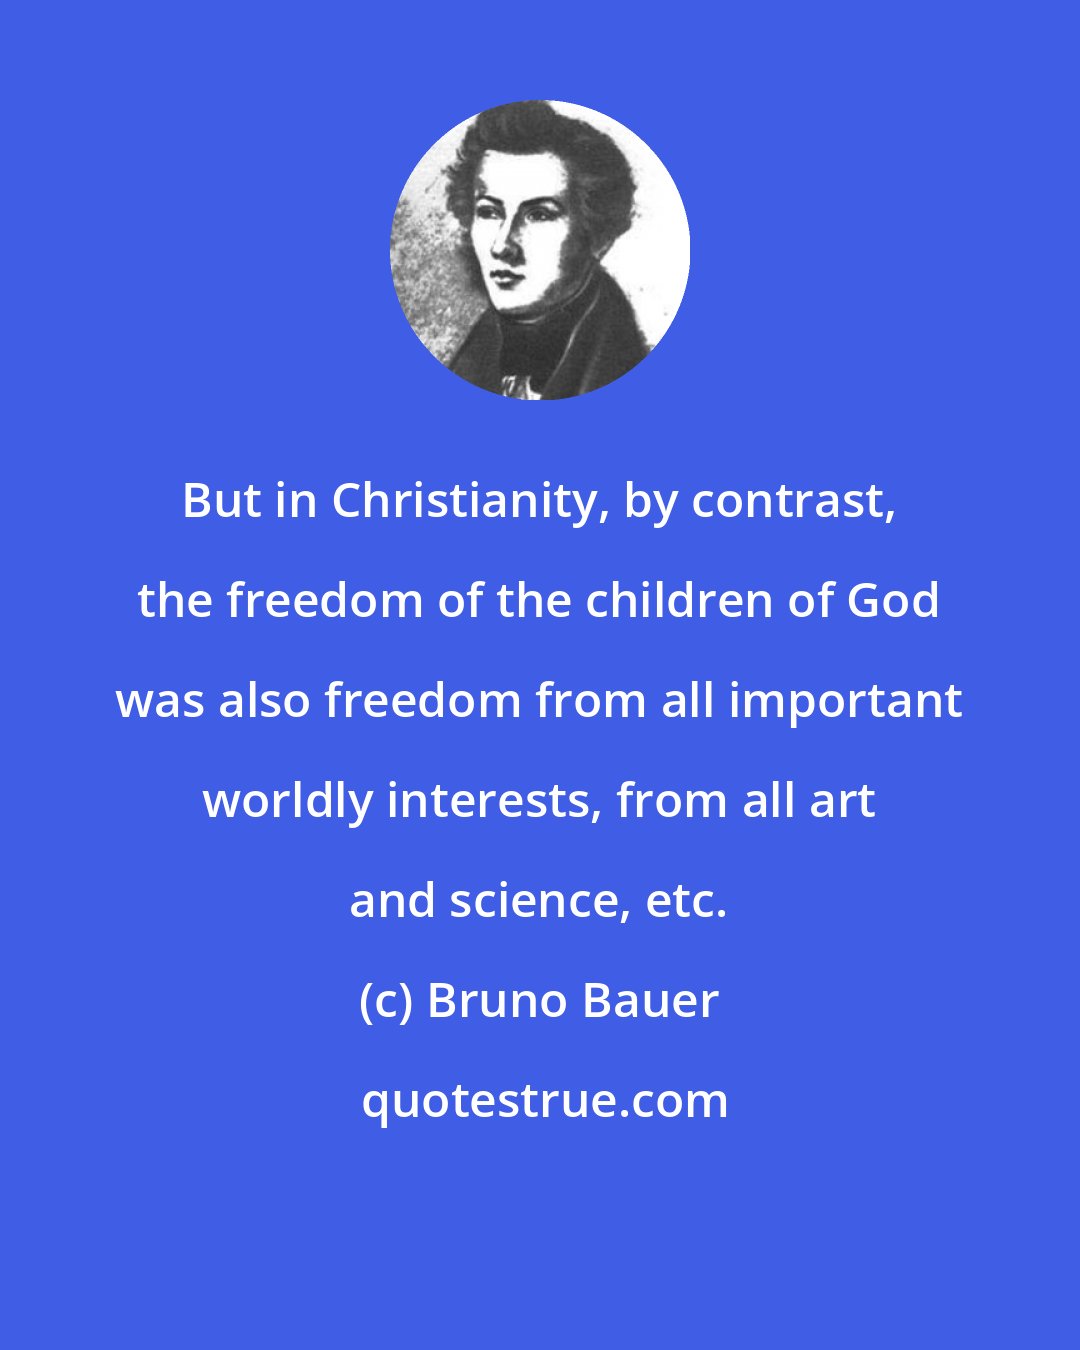 Bruno Bauer: But in Christianity, by contrast, the freedom of the children of God was also freedom from all important worldly interests, from all art and science, etc.